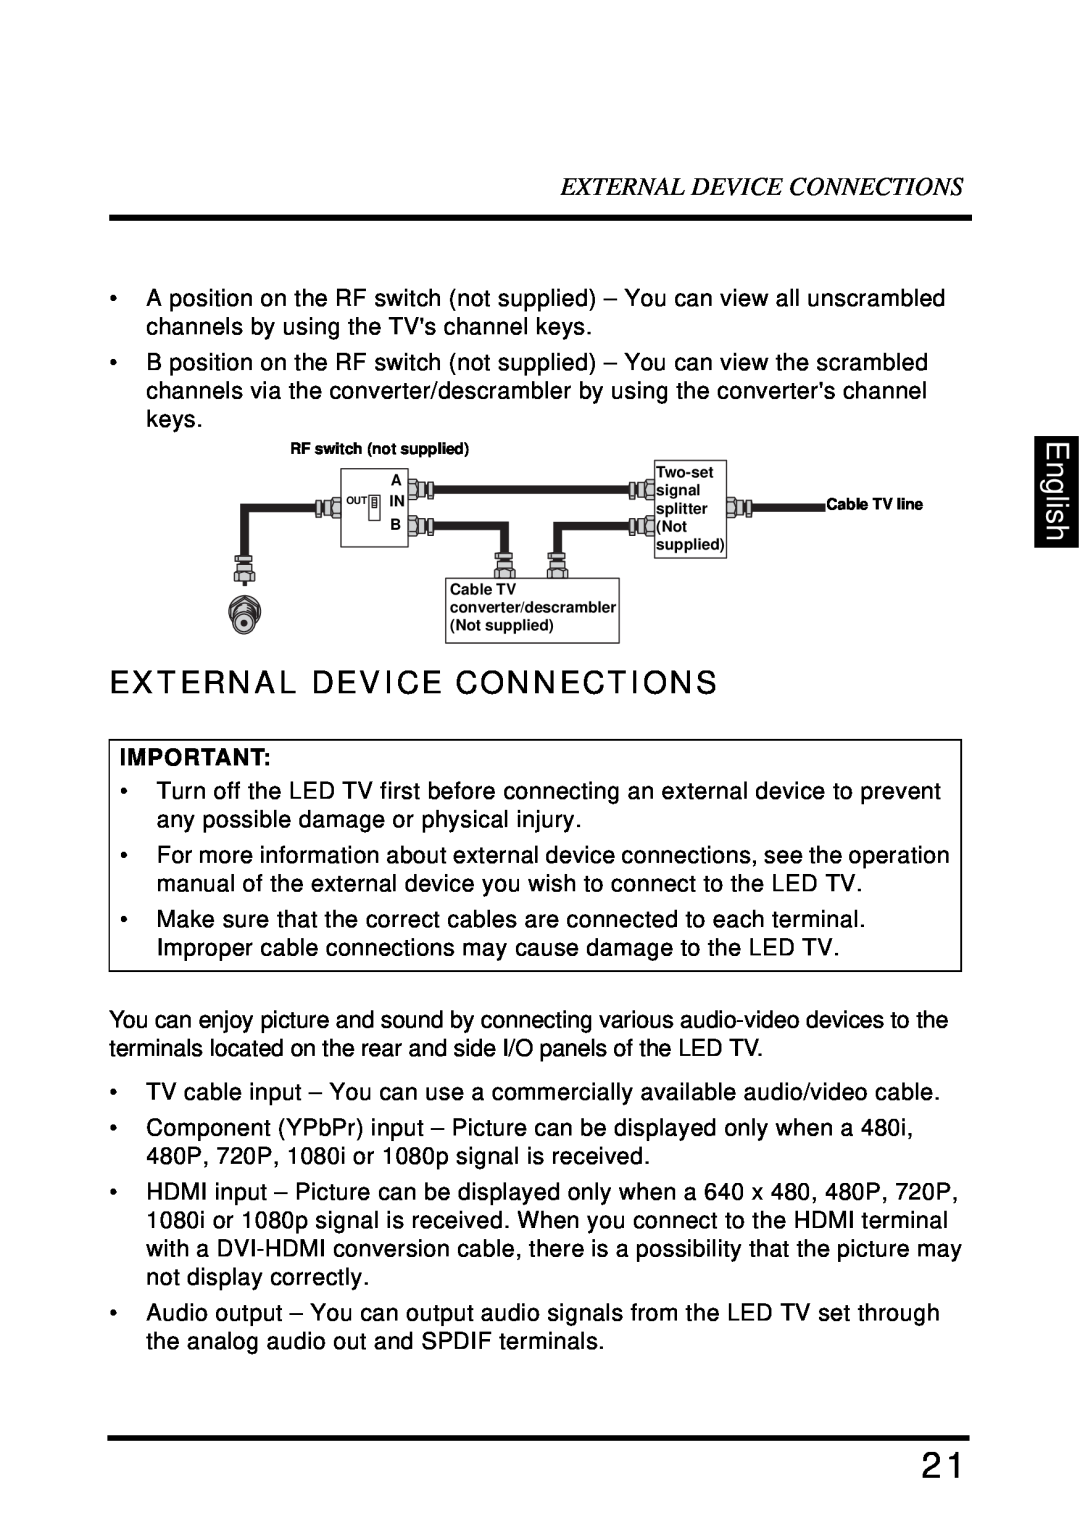 Westinghouse LD-4680 user manual External Device Connections, English 